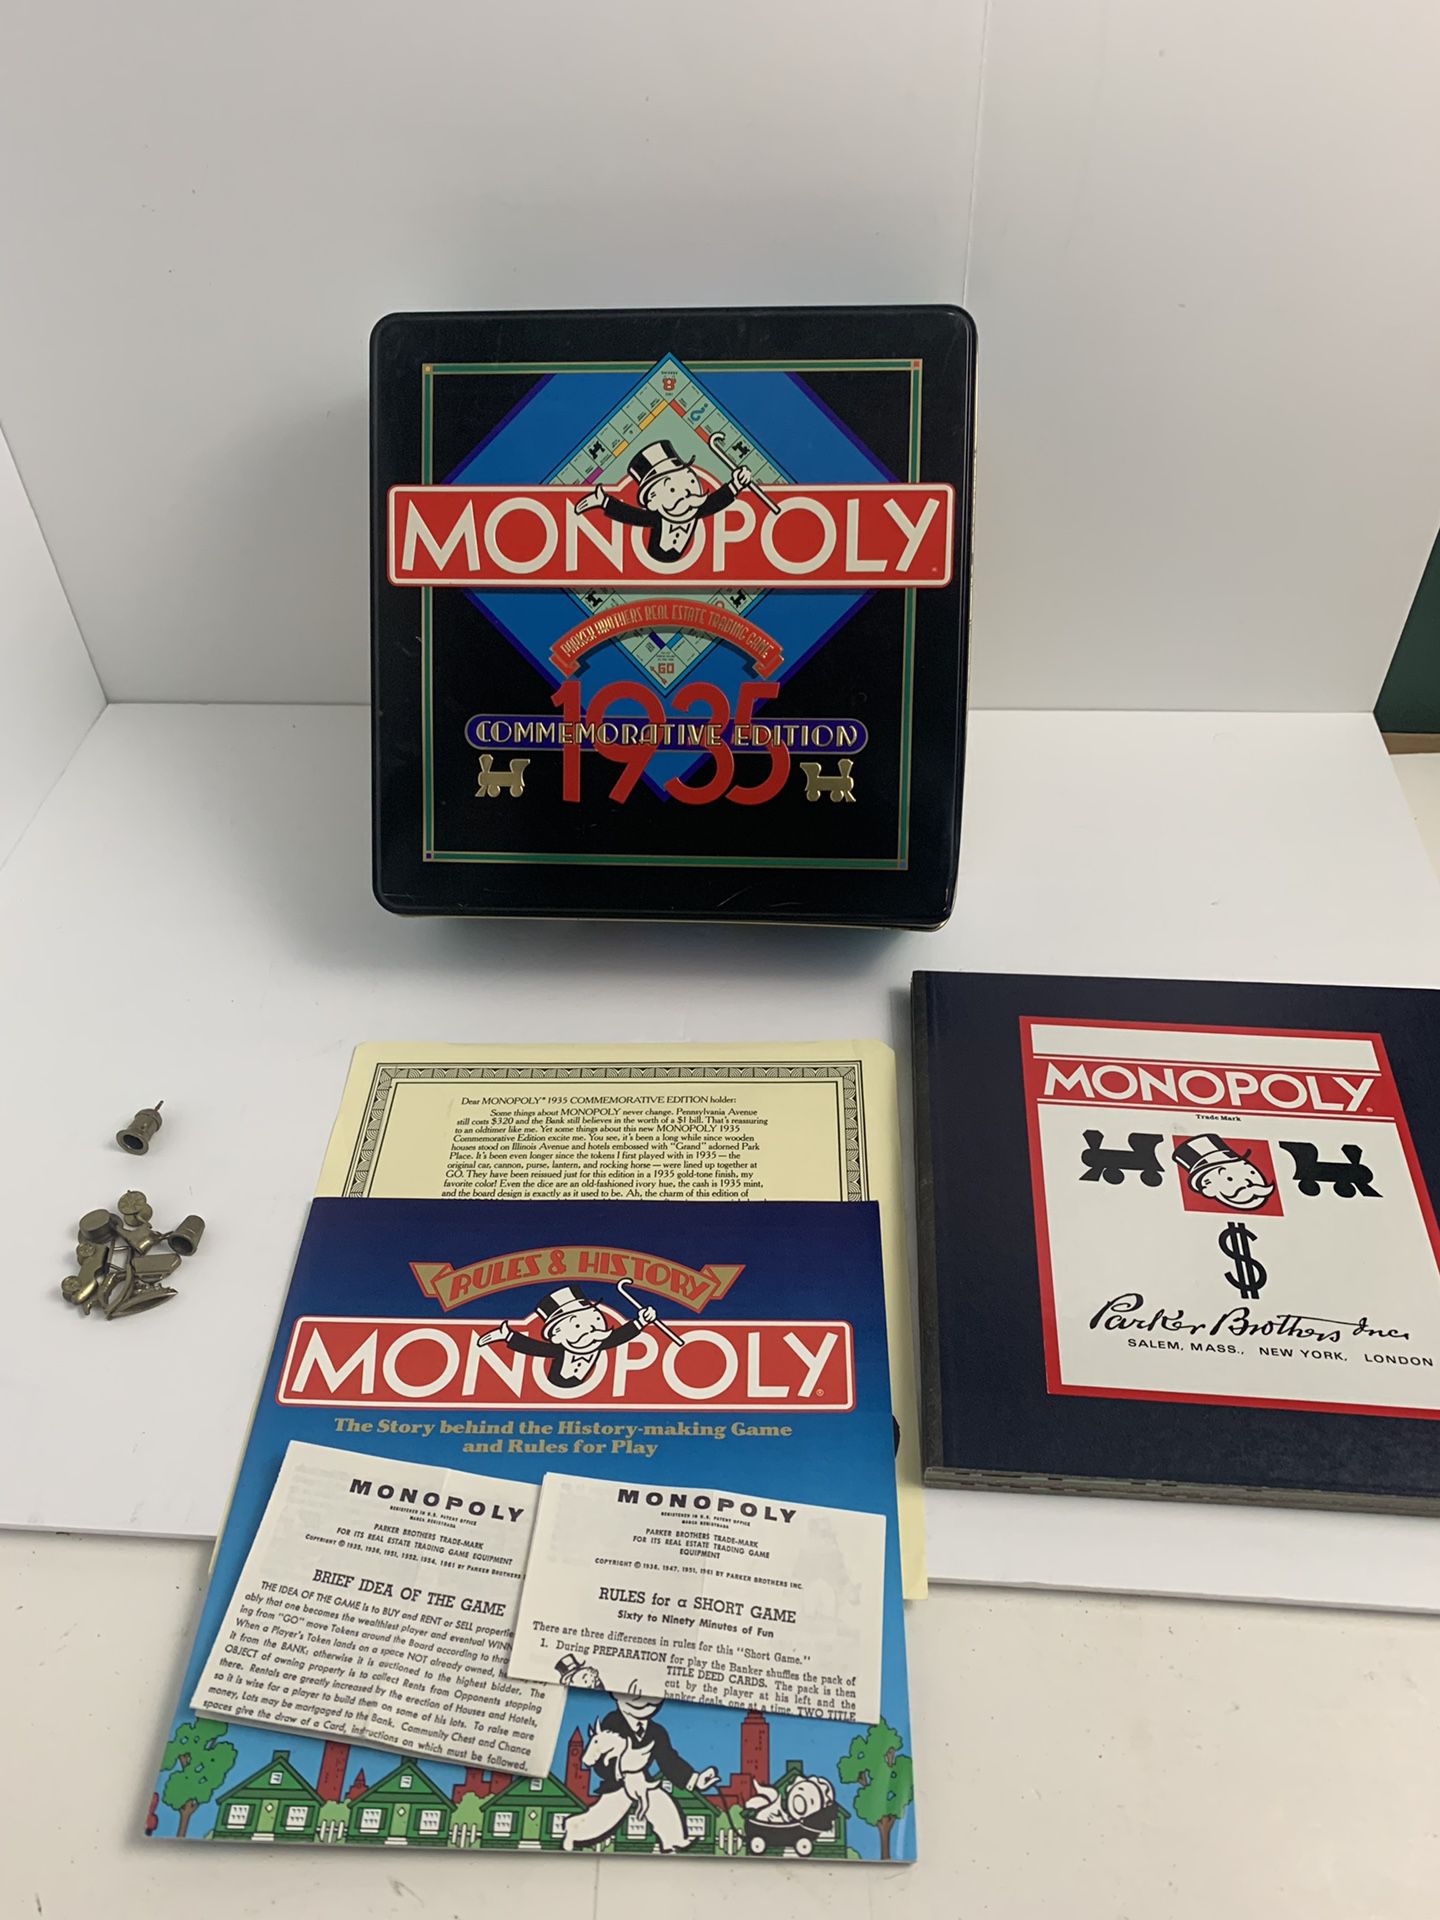 Monopoly 1935 Commemorative Edition Board Game Parker Brothers Metal Box 1985 COMPLETE